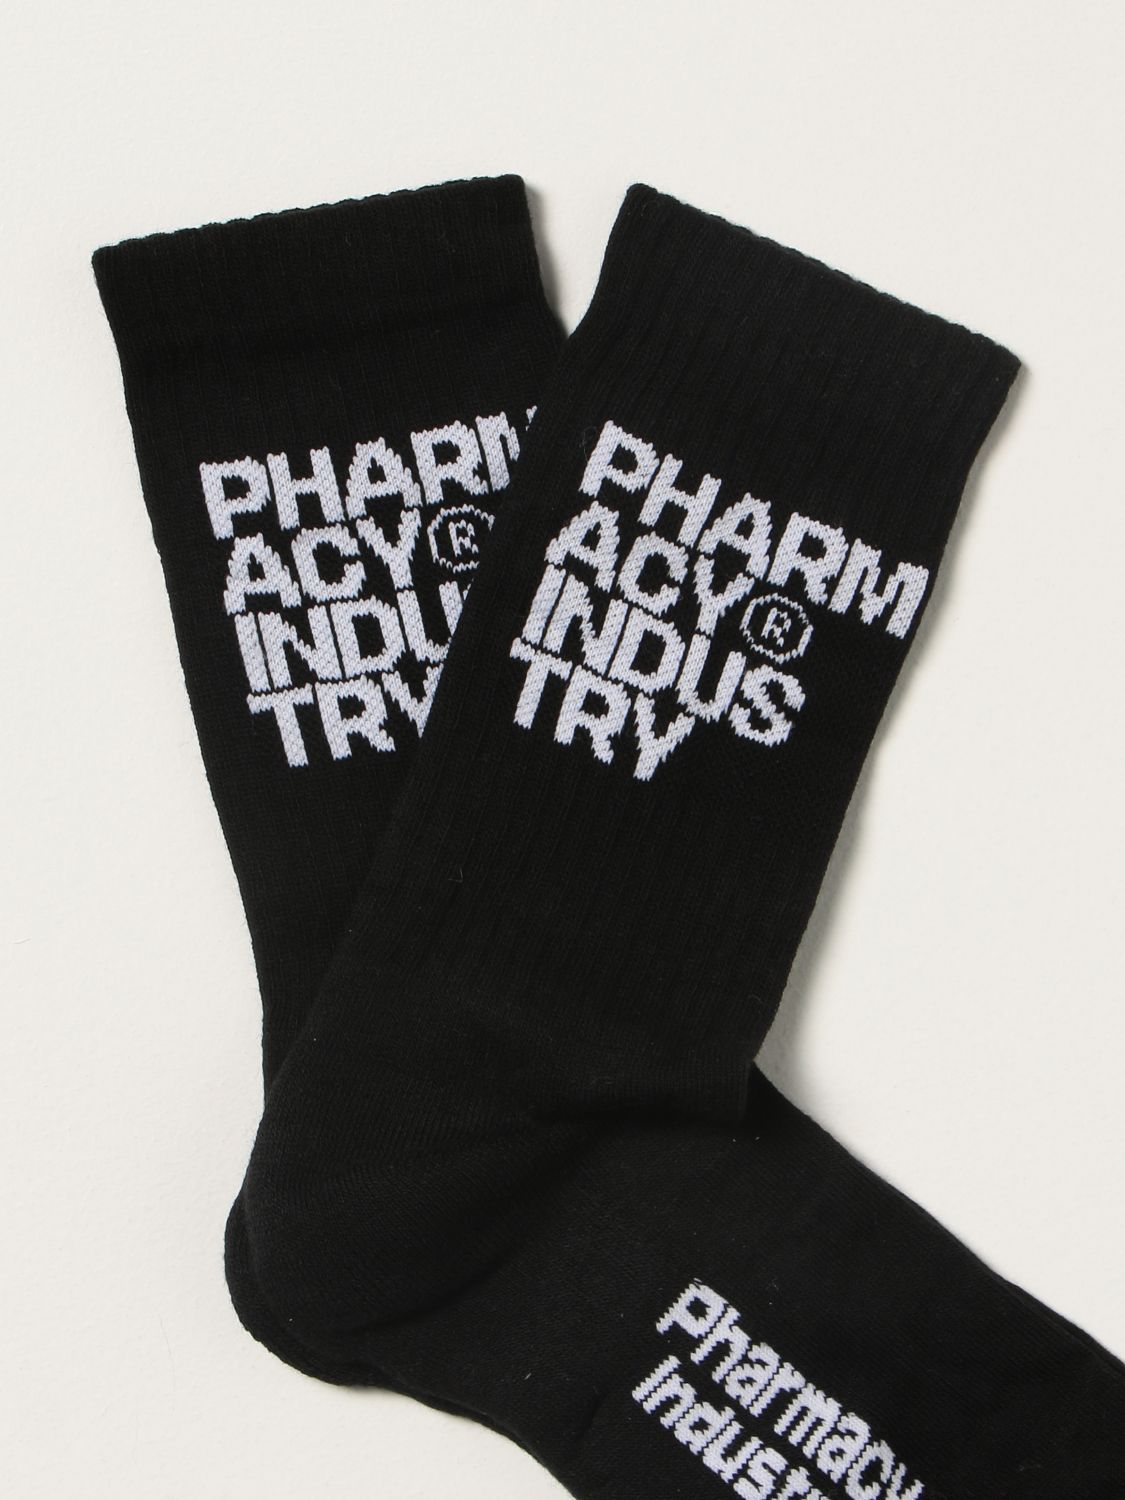 Chaussettes Pharmacy Industry: Chaussettes femme Pharmacy Industry noir 2